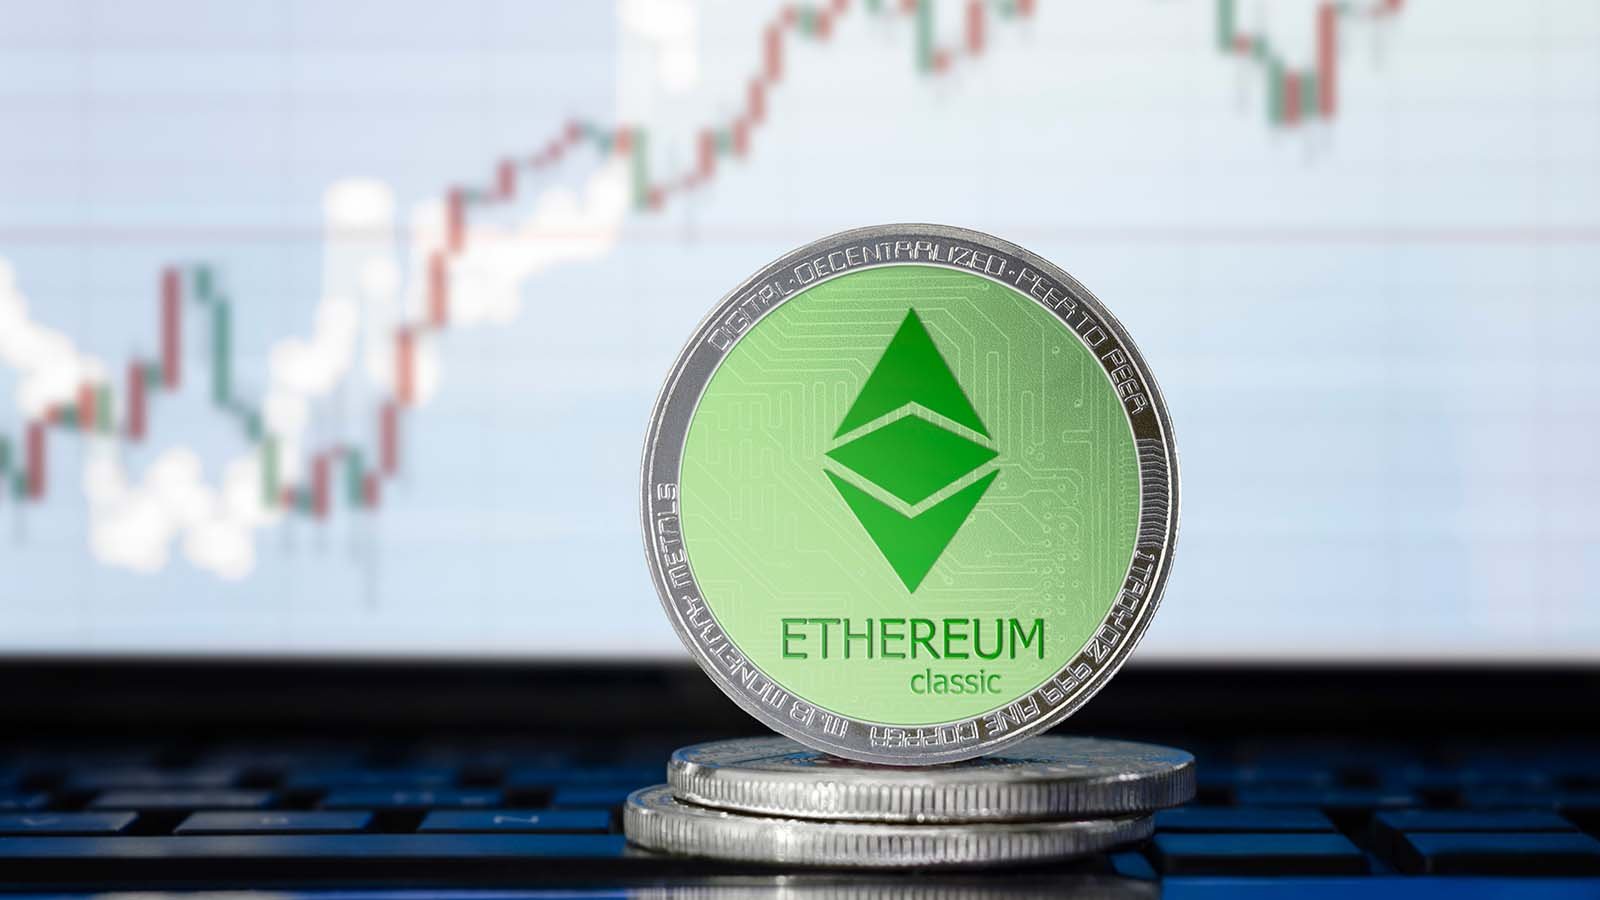 How much is ethereum classic worth robinhood